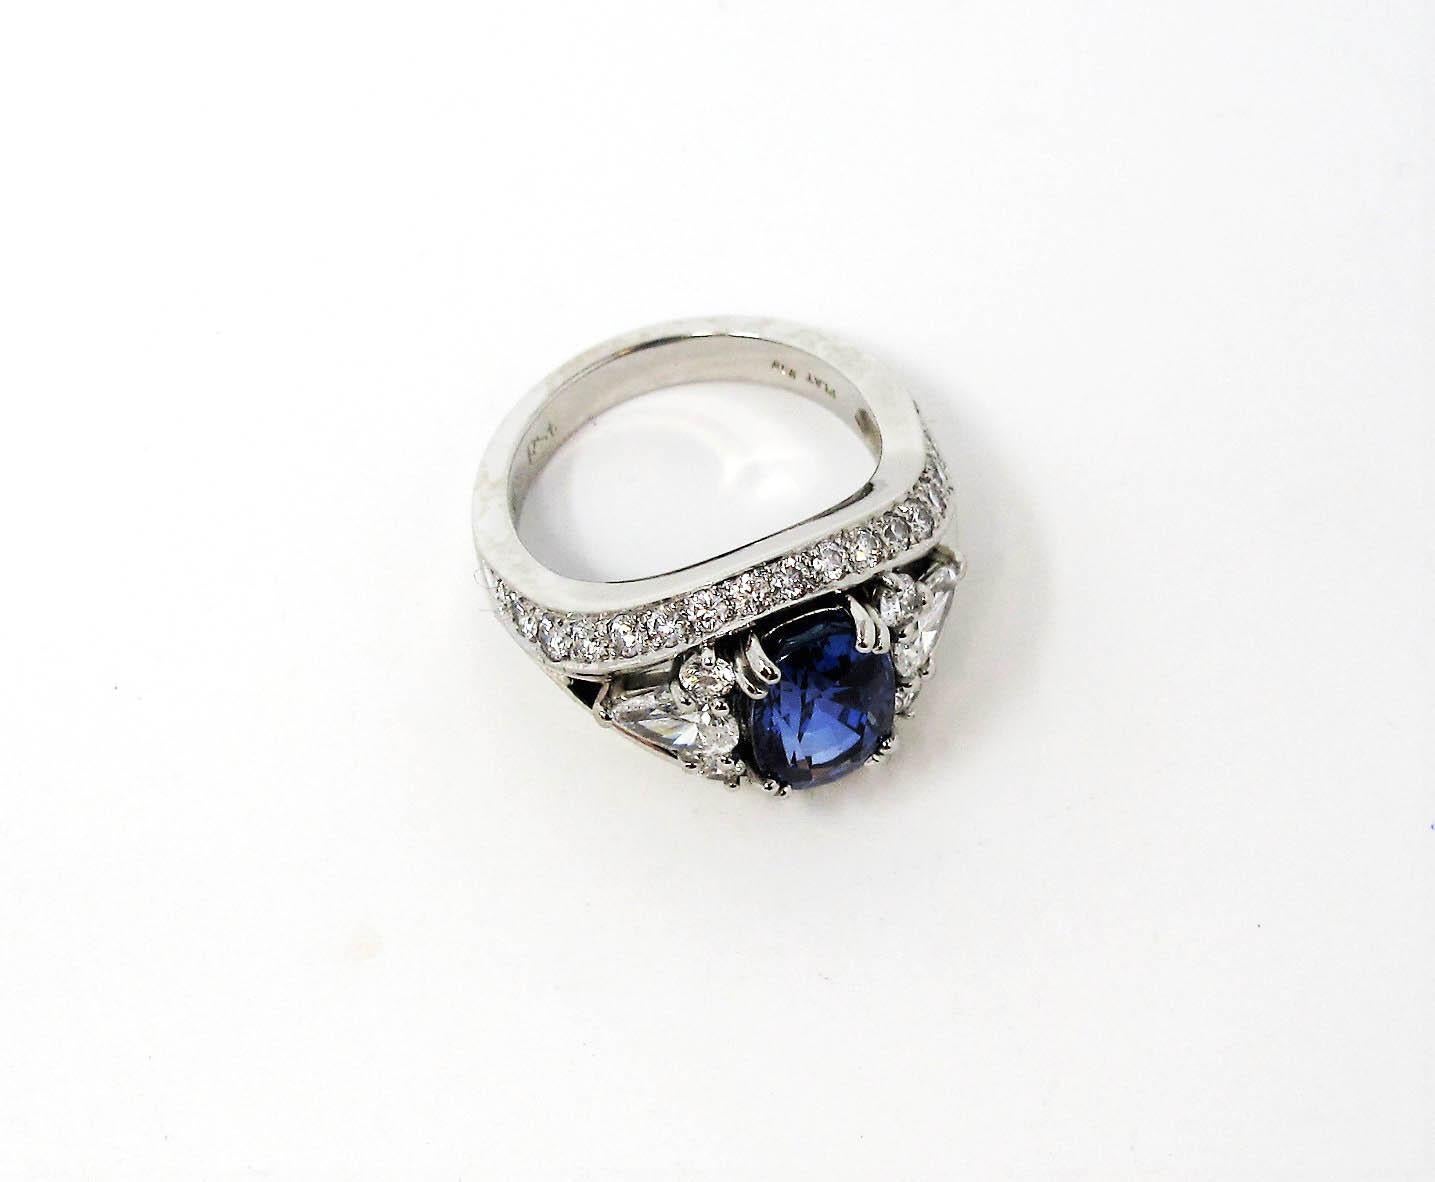 Cushion Cut 3.10 Carat Untreated Oval Mixed Cut Sapphire and Diamond Ring in Platinum For Sale